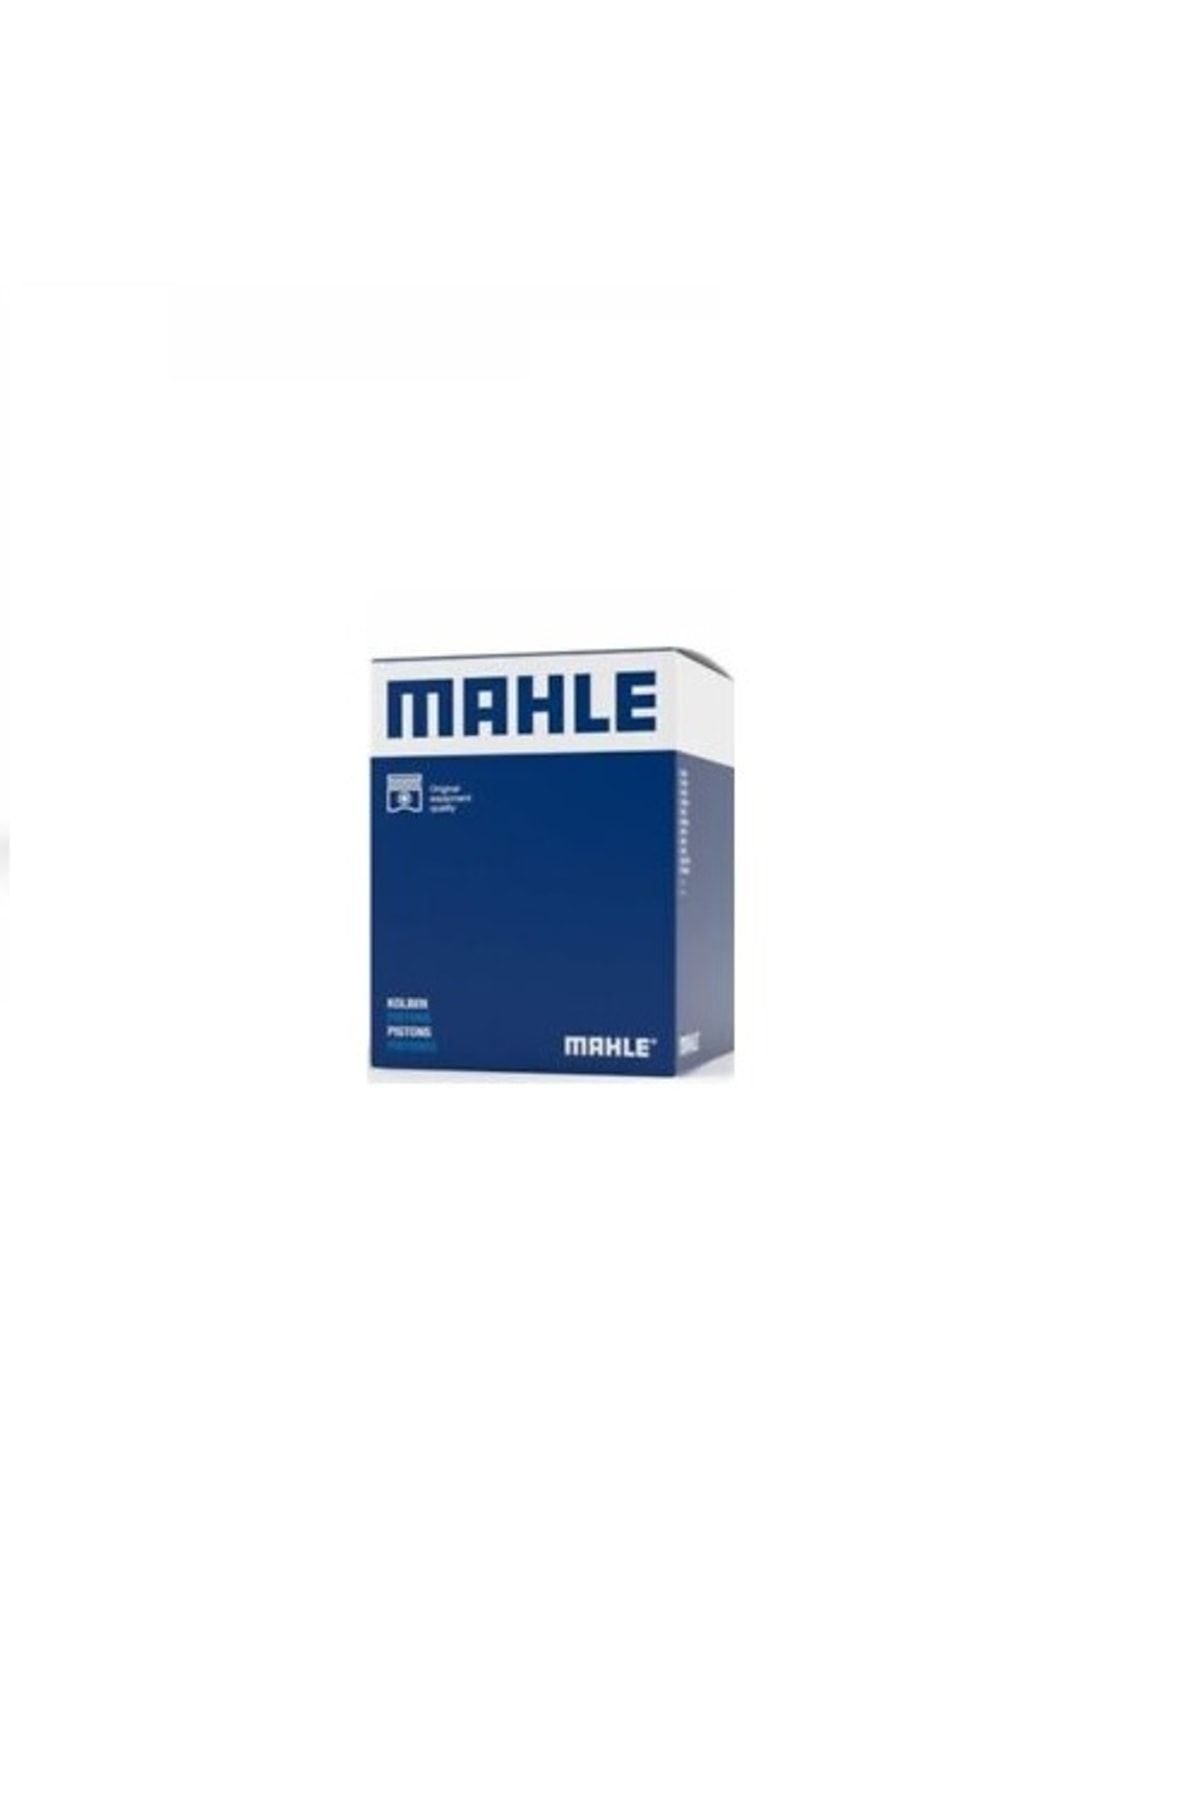 Mahle 029hs18815025 Ana Yatak 0.25 1t 2b 3b 3d 7a Aan Aar Aas Aat Abp Aby Adu Ael 454198620 (WH756763)